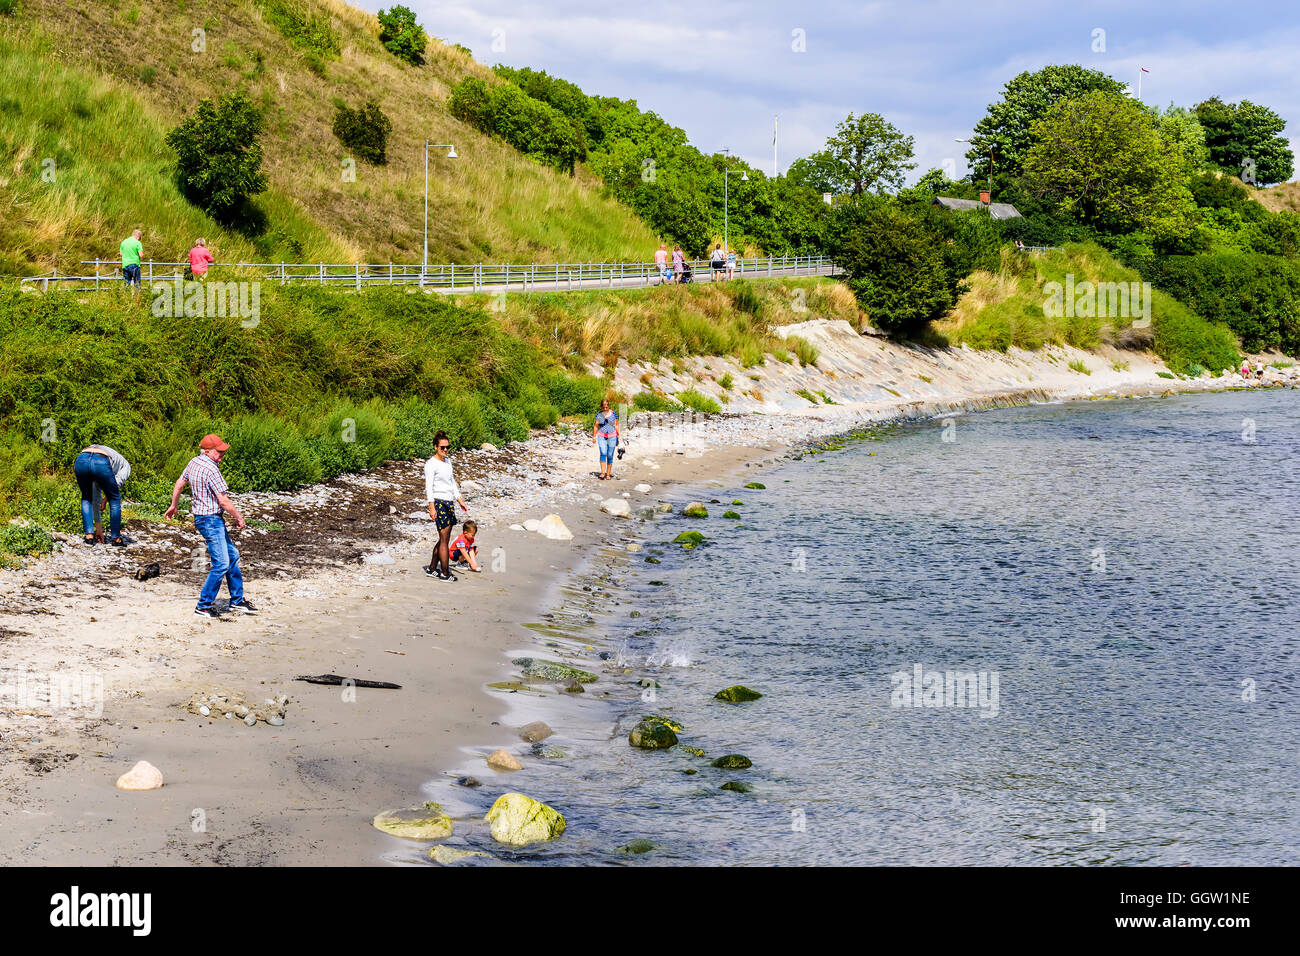 Kaseberga, Sweden - August 1, 2016: People walking and throwing stones at the beach. Real life situation. Stock Photo